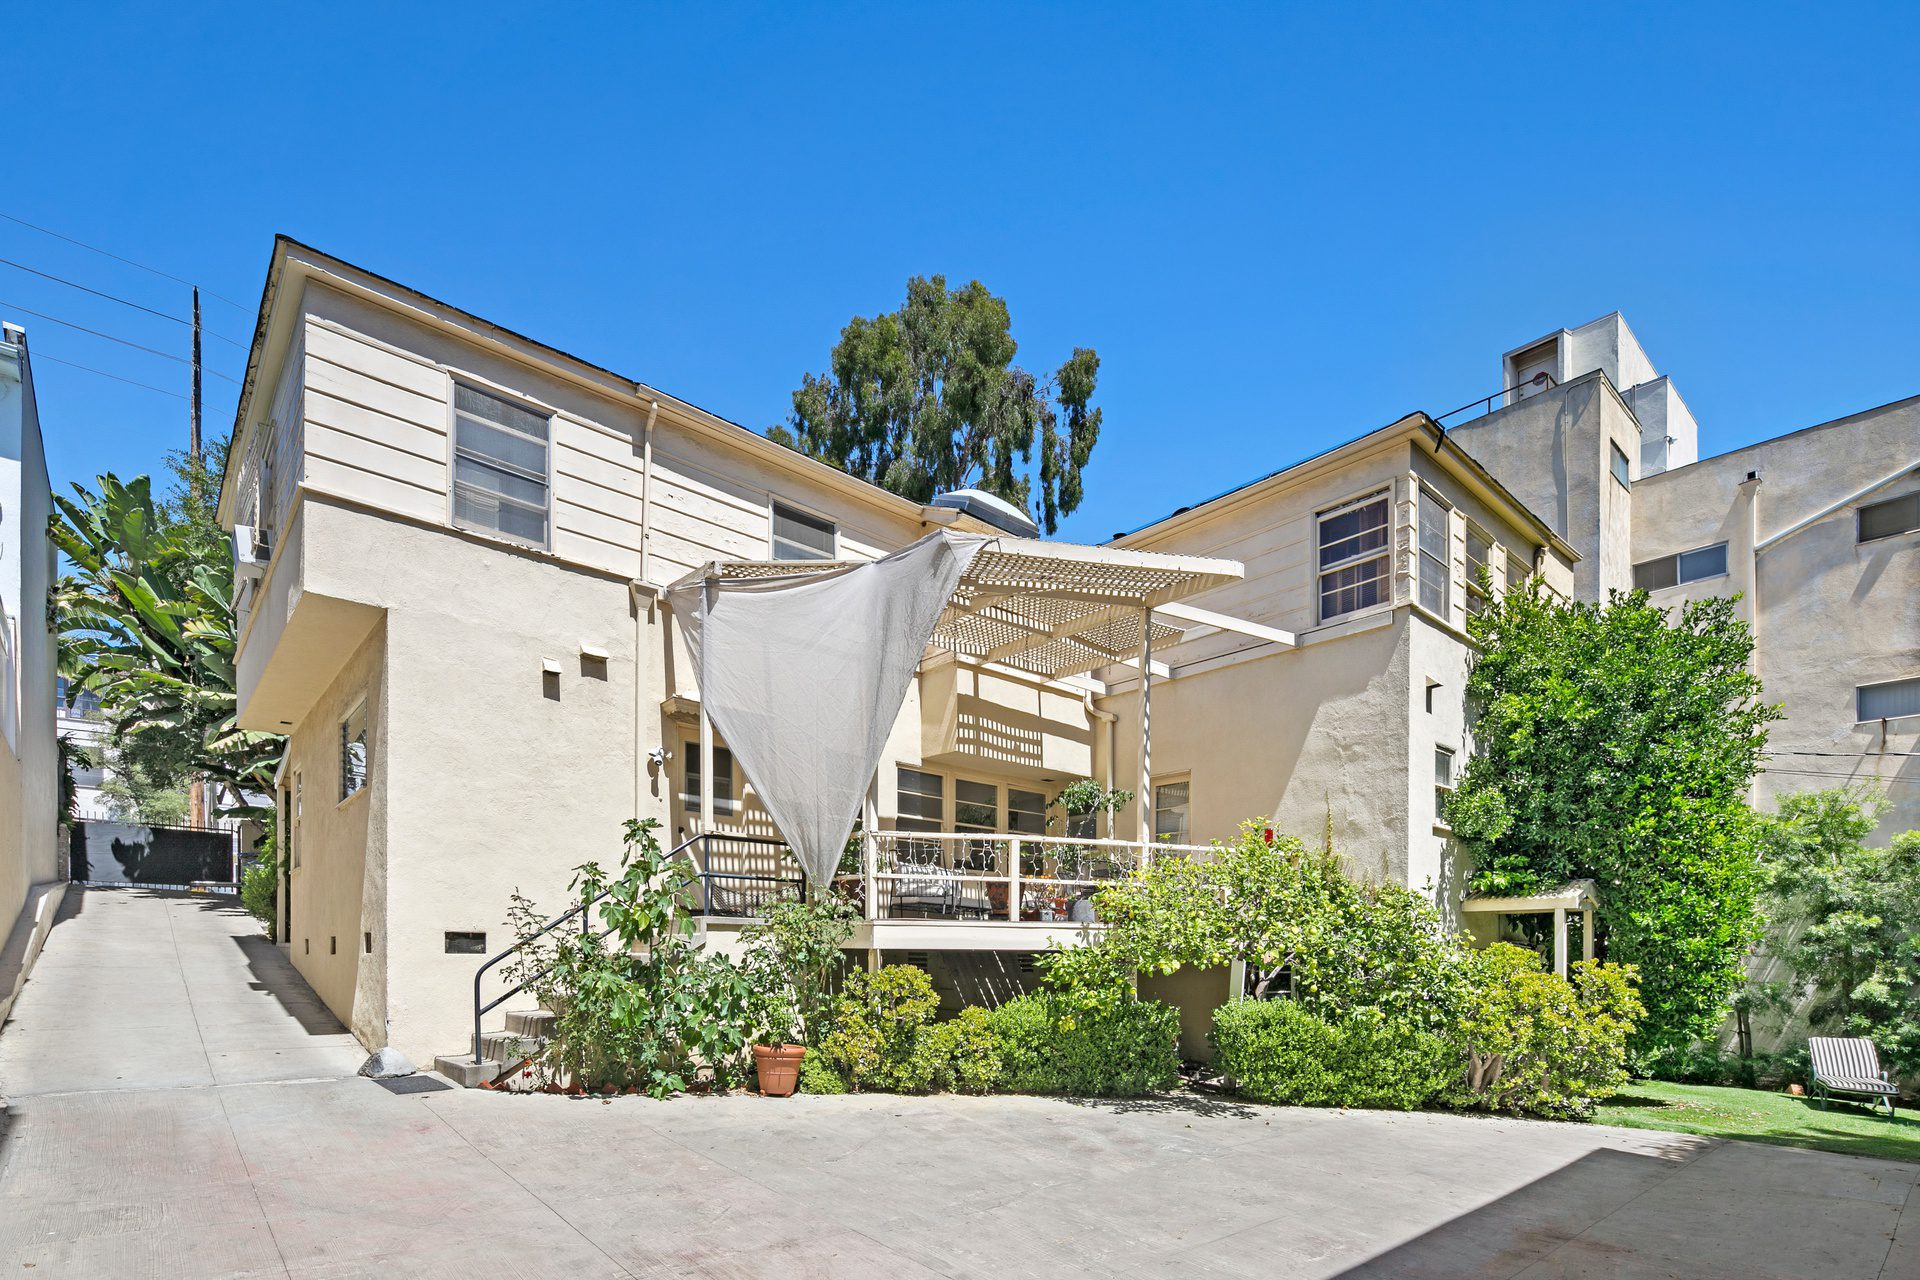 Exterior of 8570 Holloway Drive, a mutlifamily development opportunity near the Sunset Strip